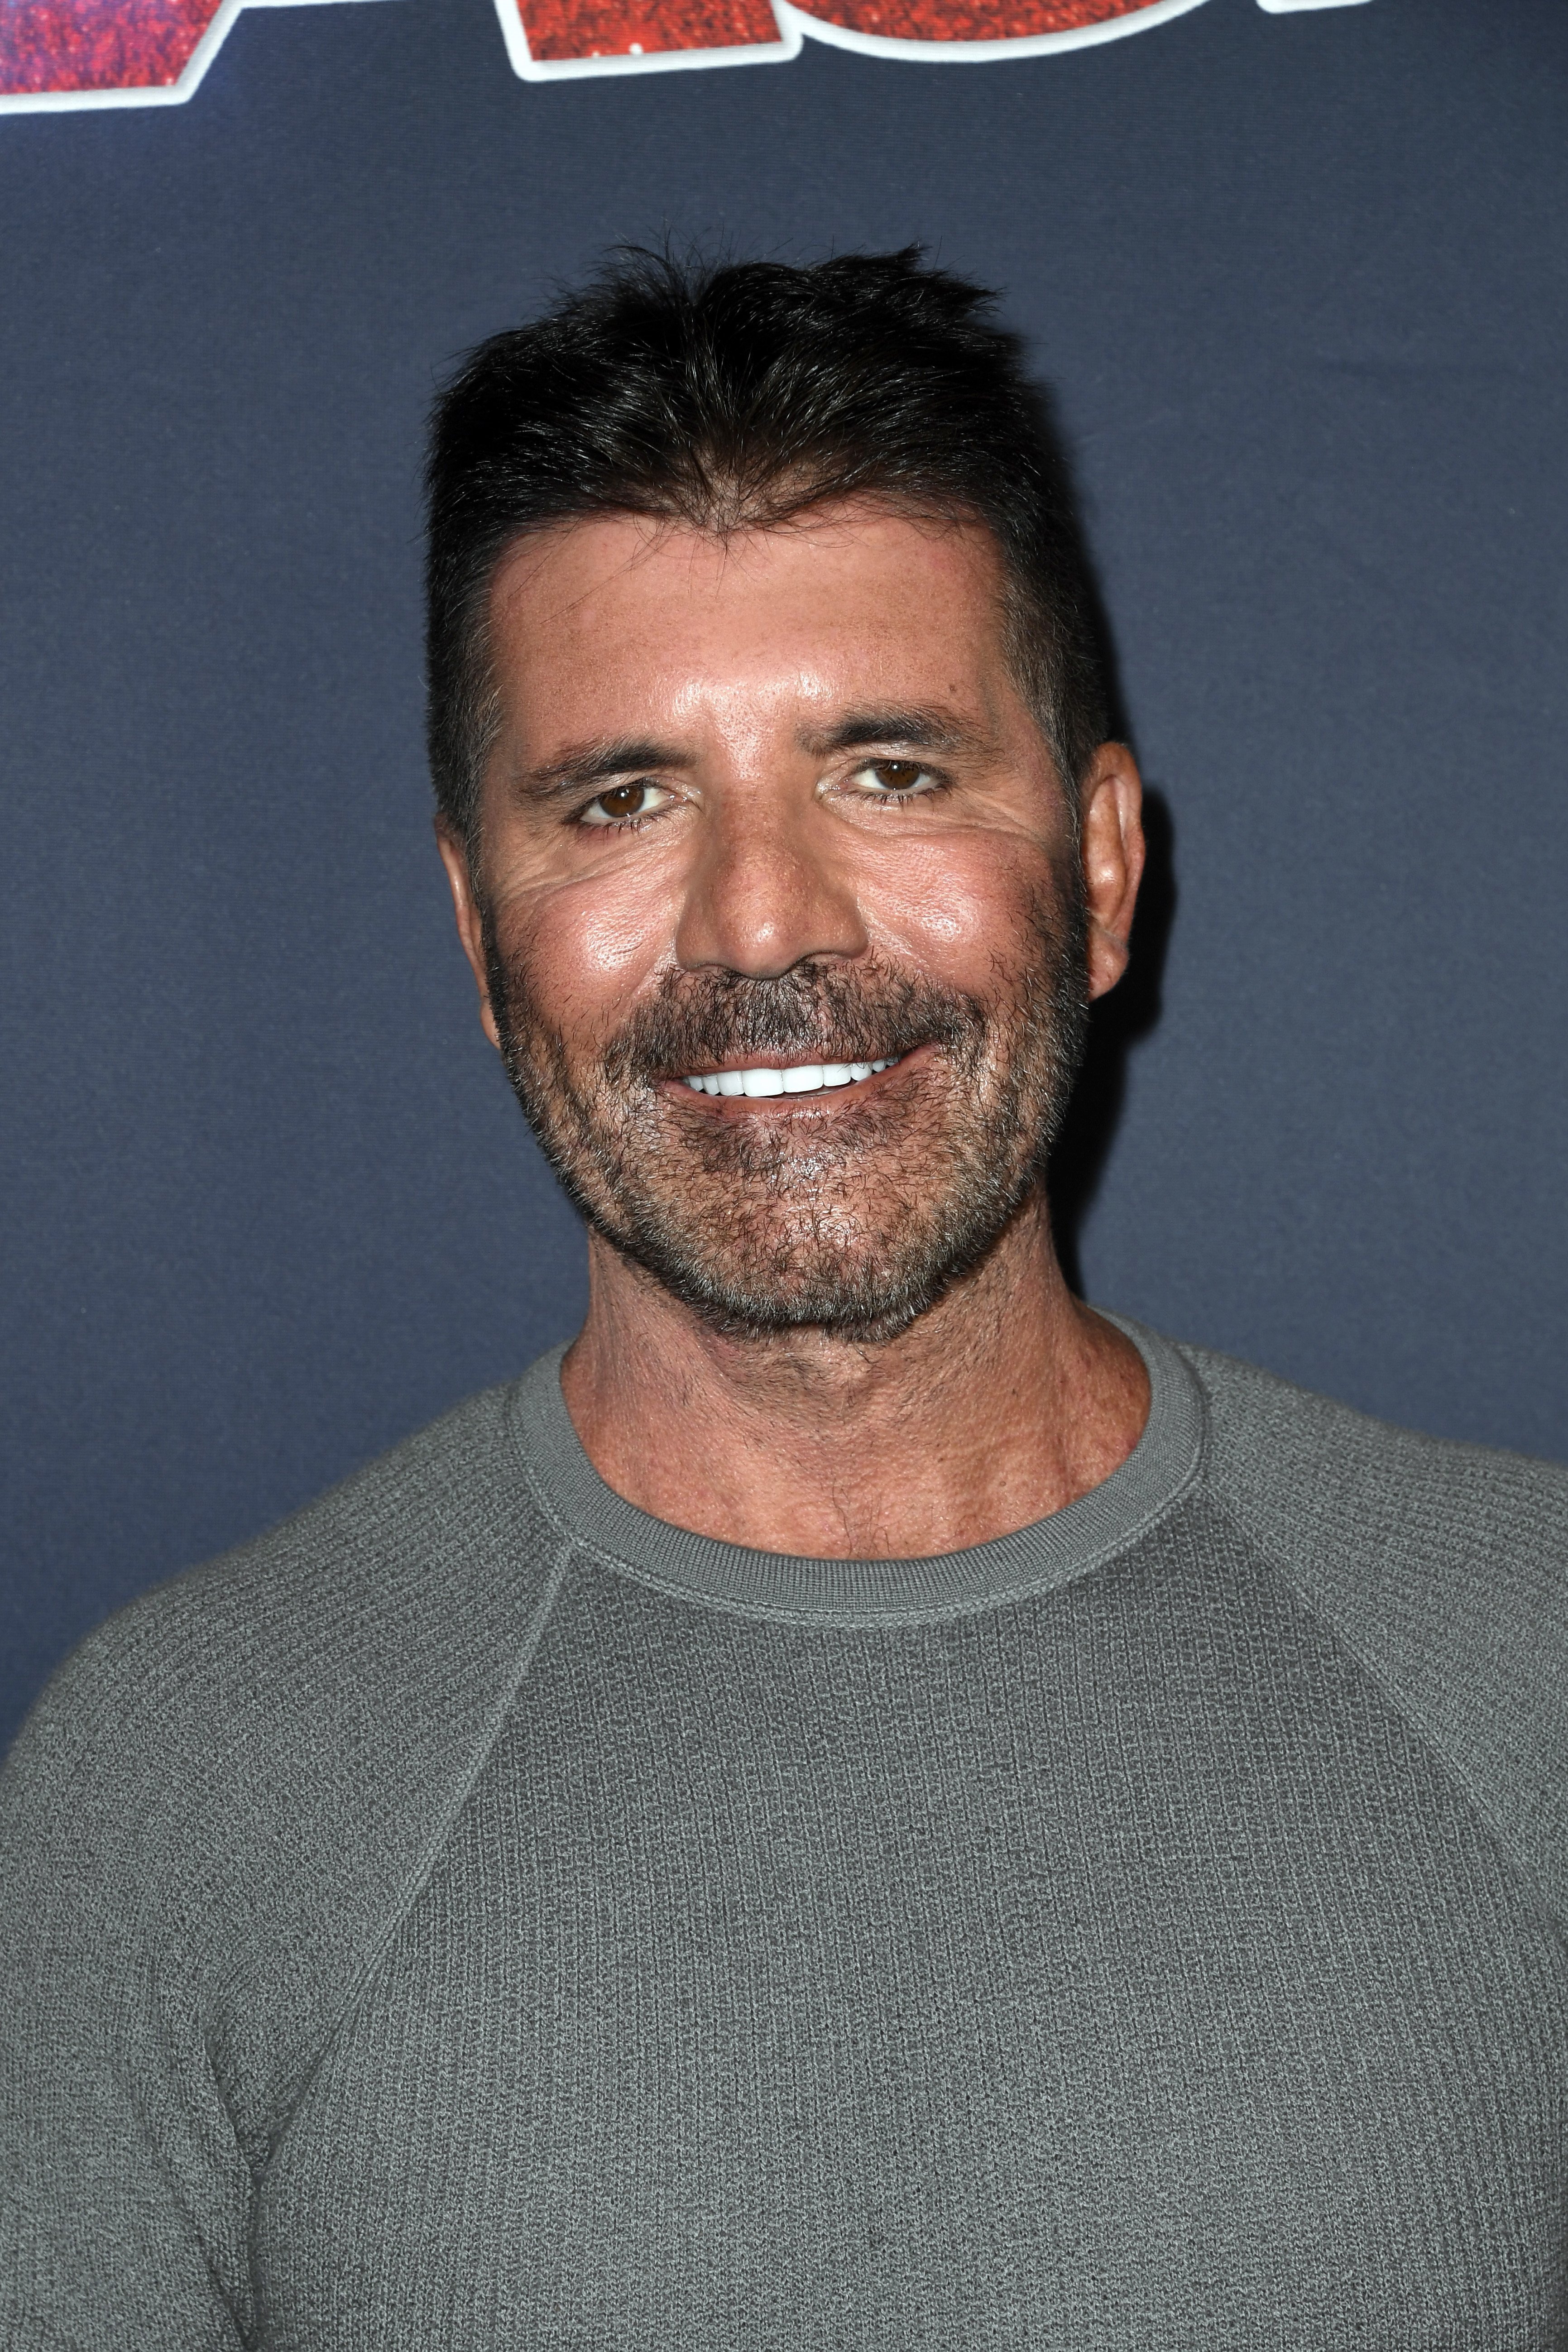 Simon Cowell attends the season 14 Live Show of "America's Got Talent" in Hollywood, California on August 13, 2019 | Photo: Getty Images